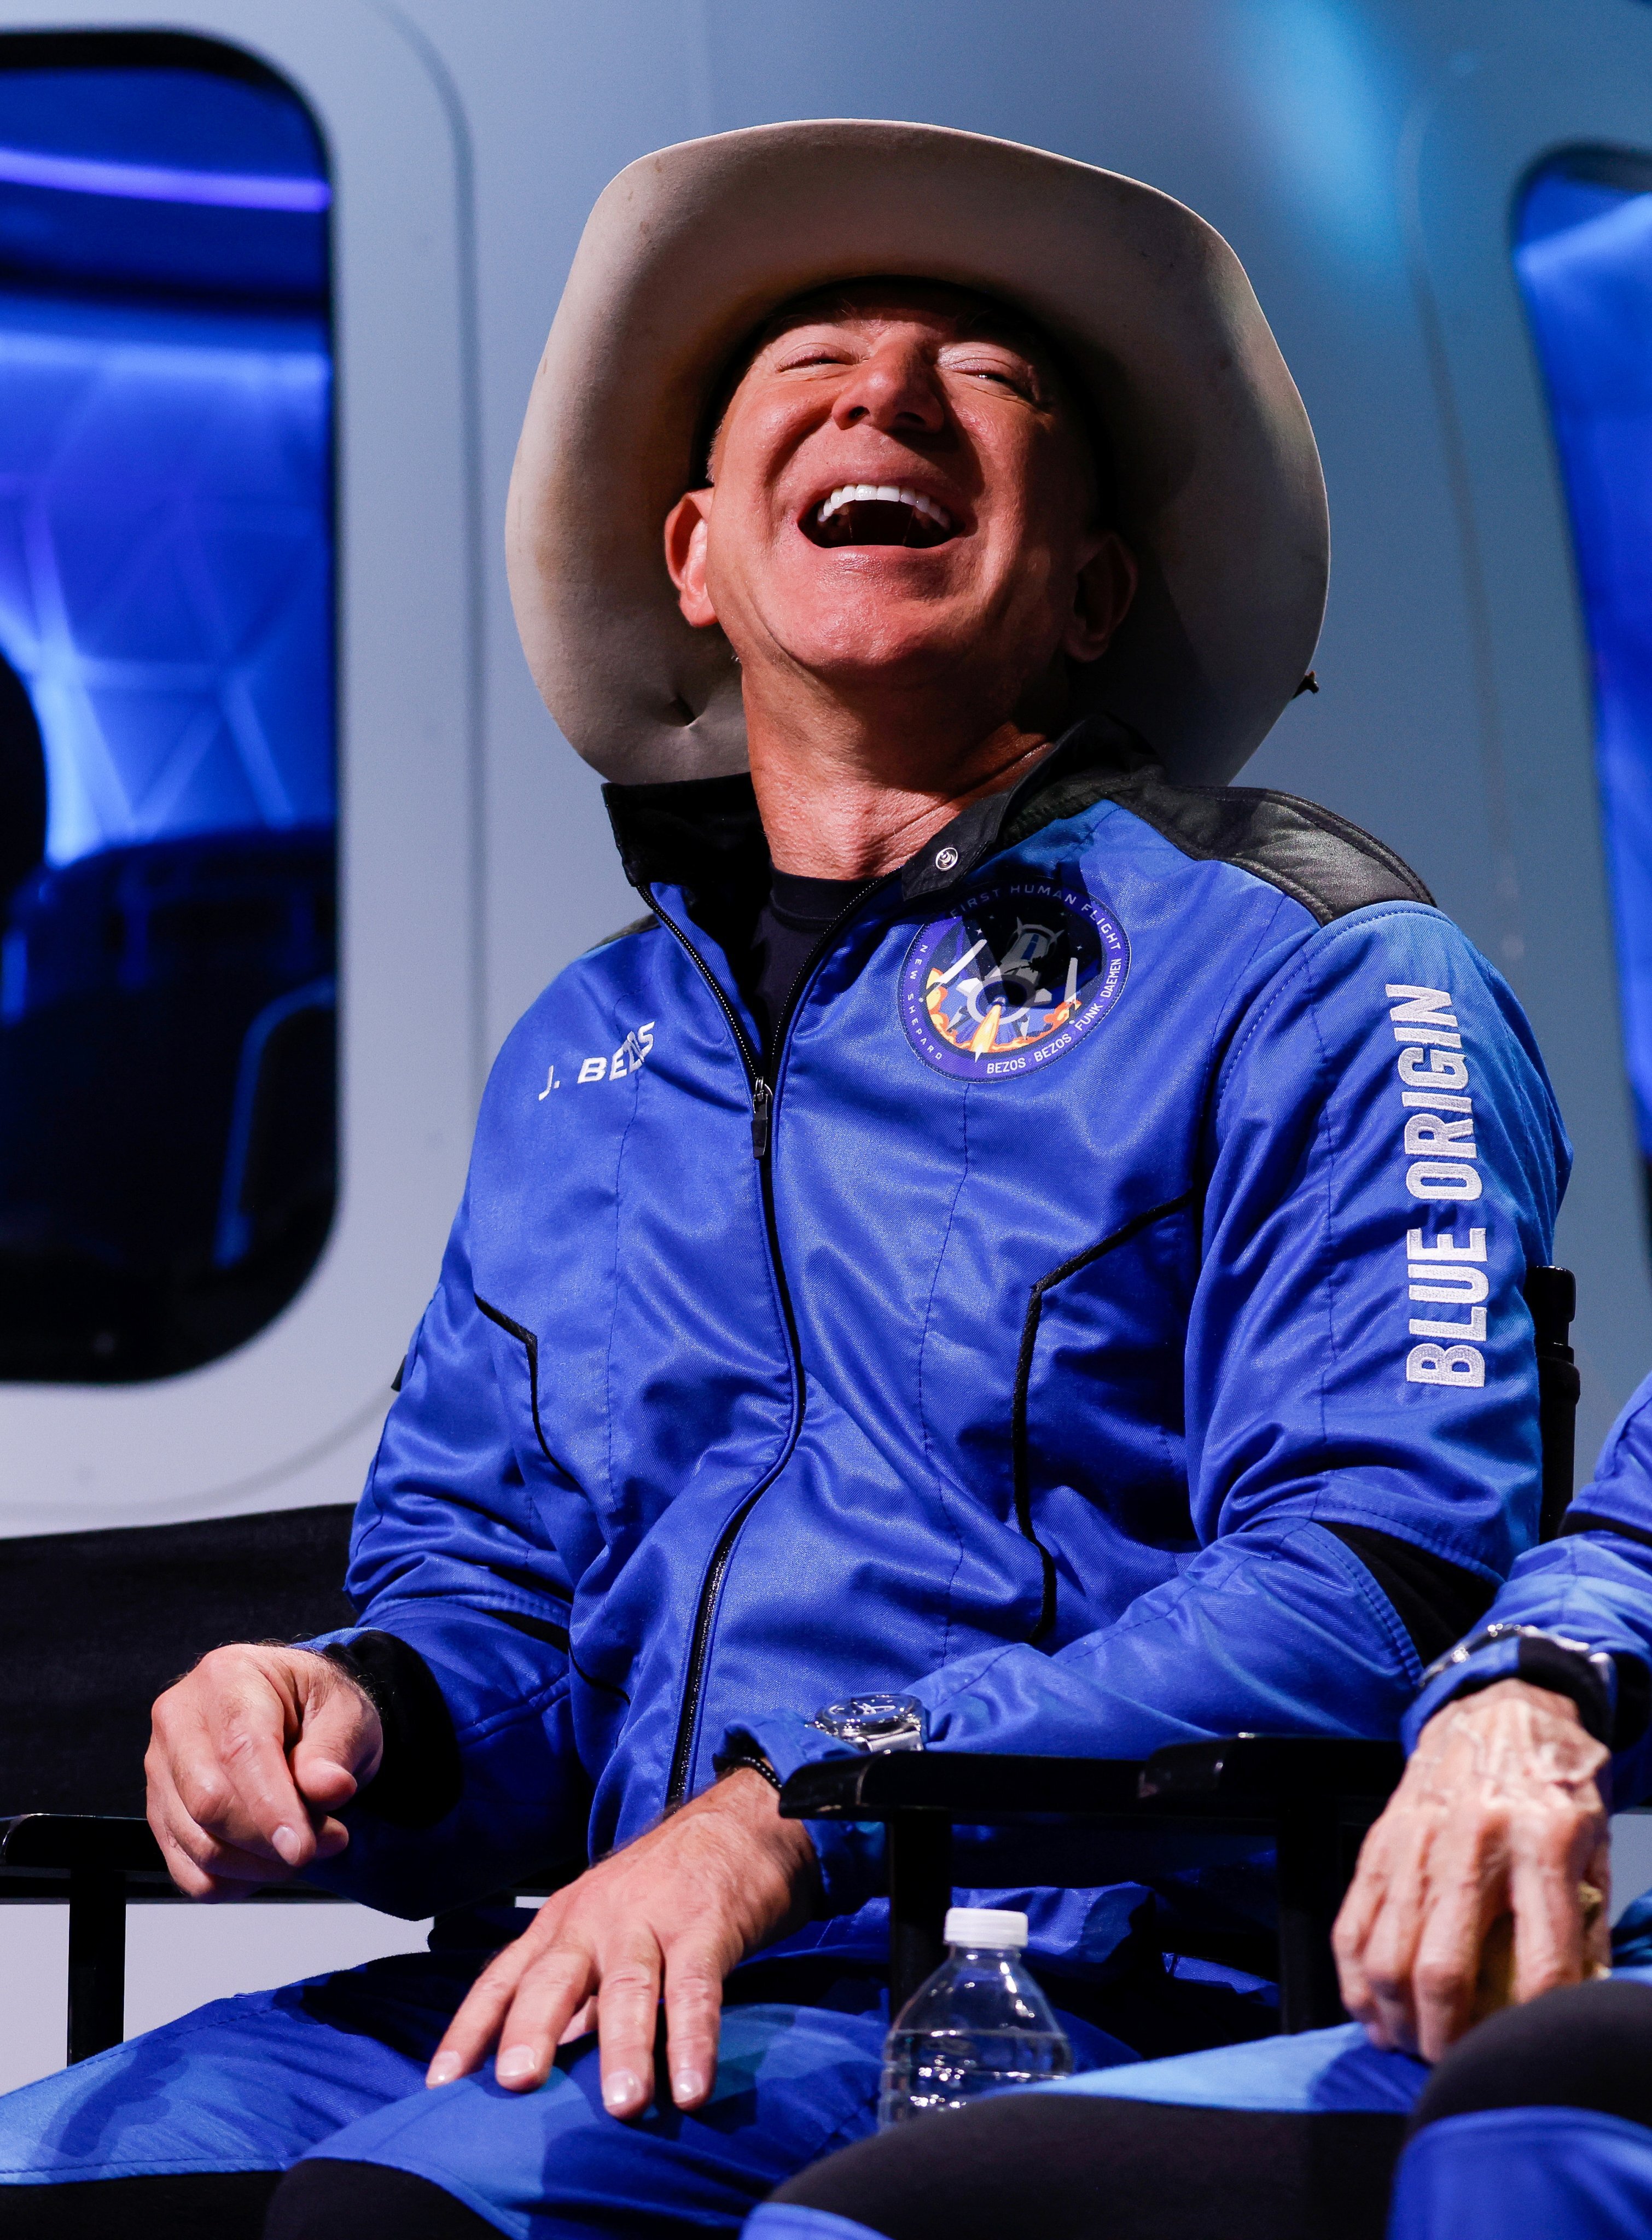 Amazon’s billionaire founder Jeff Bezos pictured in Texas, US, after his flight to the edge of space on July 20, 2021. Bezos thanked Amazon workers after the flight, noting that they “paid for all of this”. Photo: Reuters